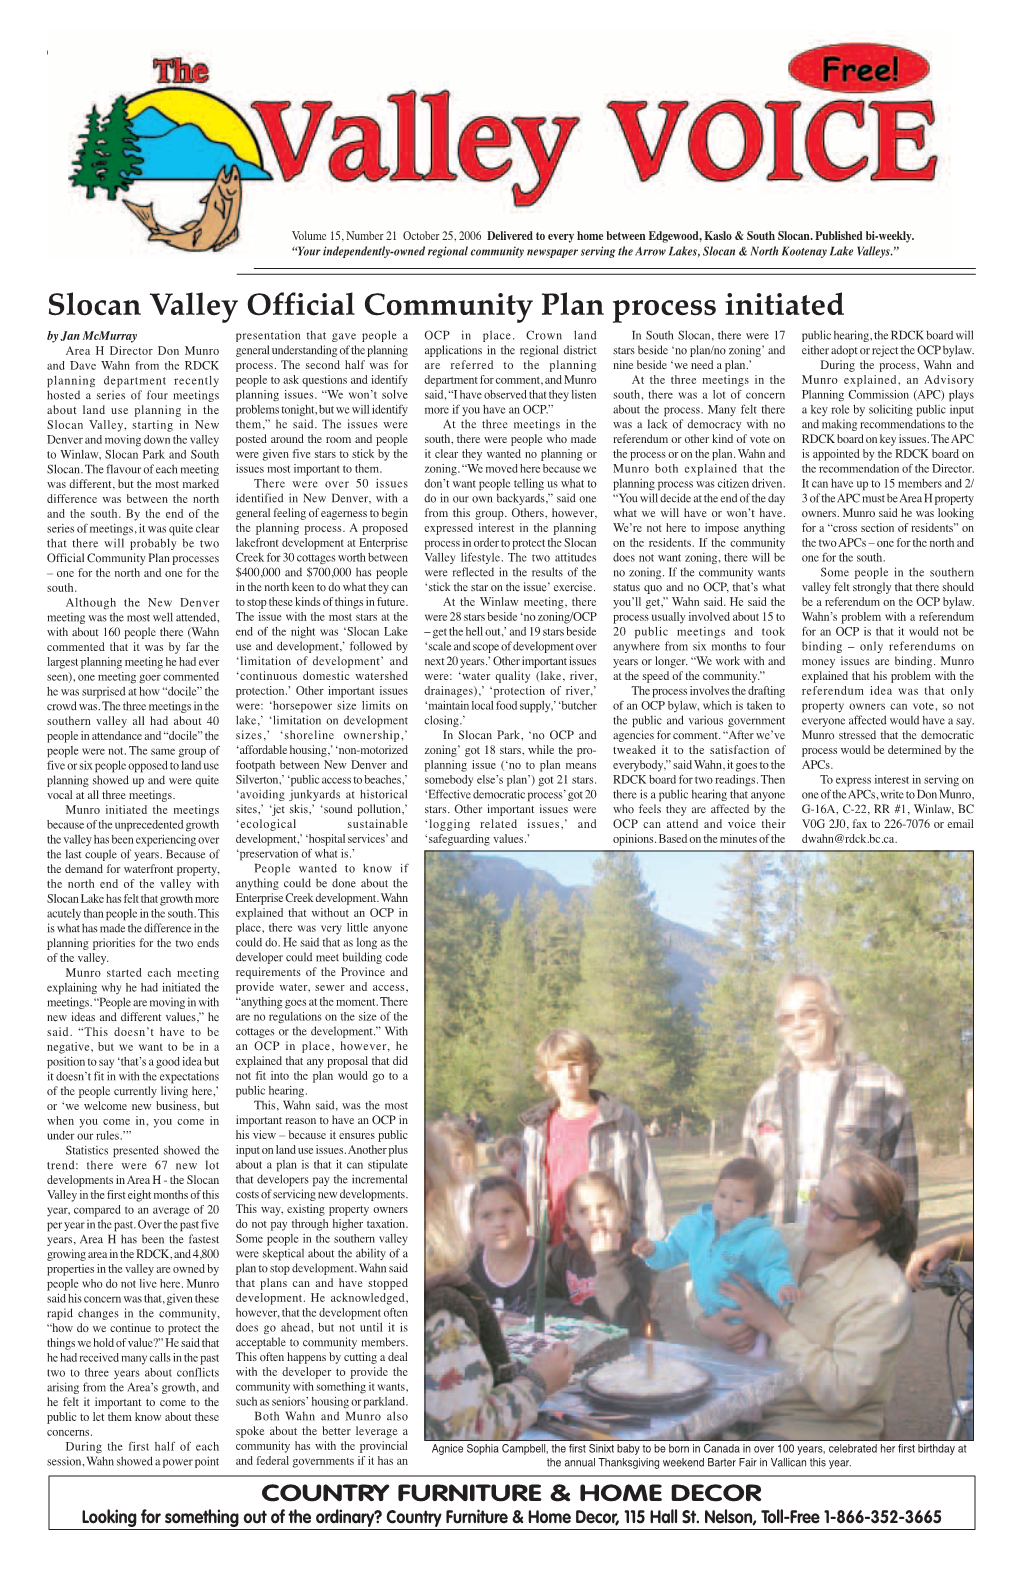 Slocan Valley Official Community Plan Process Initiated by Jan Mcmurray Presentation That Gave People a OCP in Place